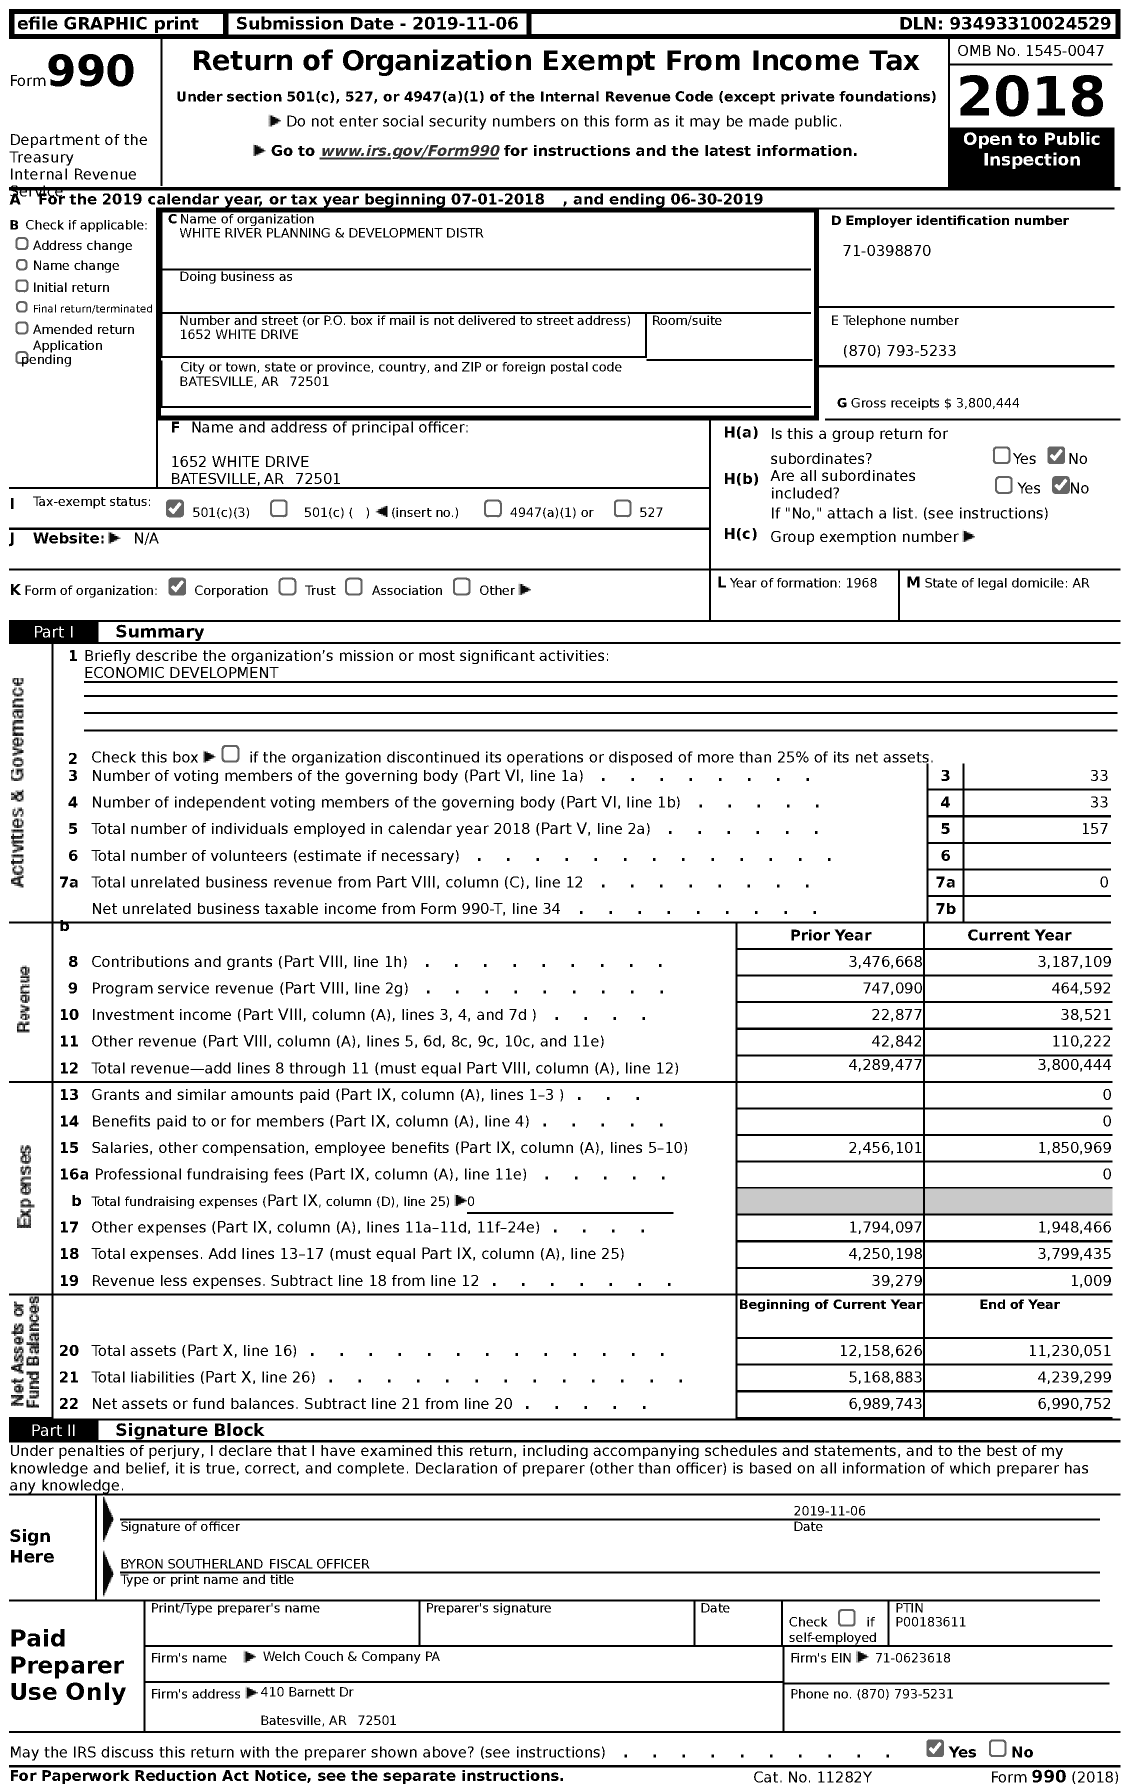 Image of first page of 2018 Form 990 for White River Planning & Development Distribution (WRPDD)